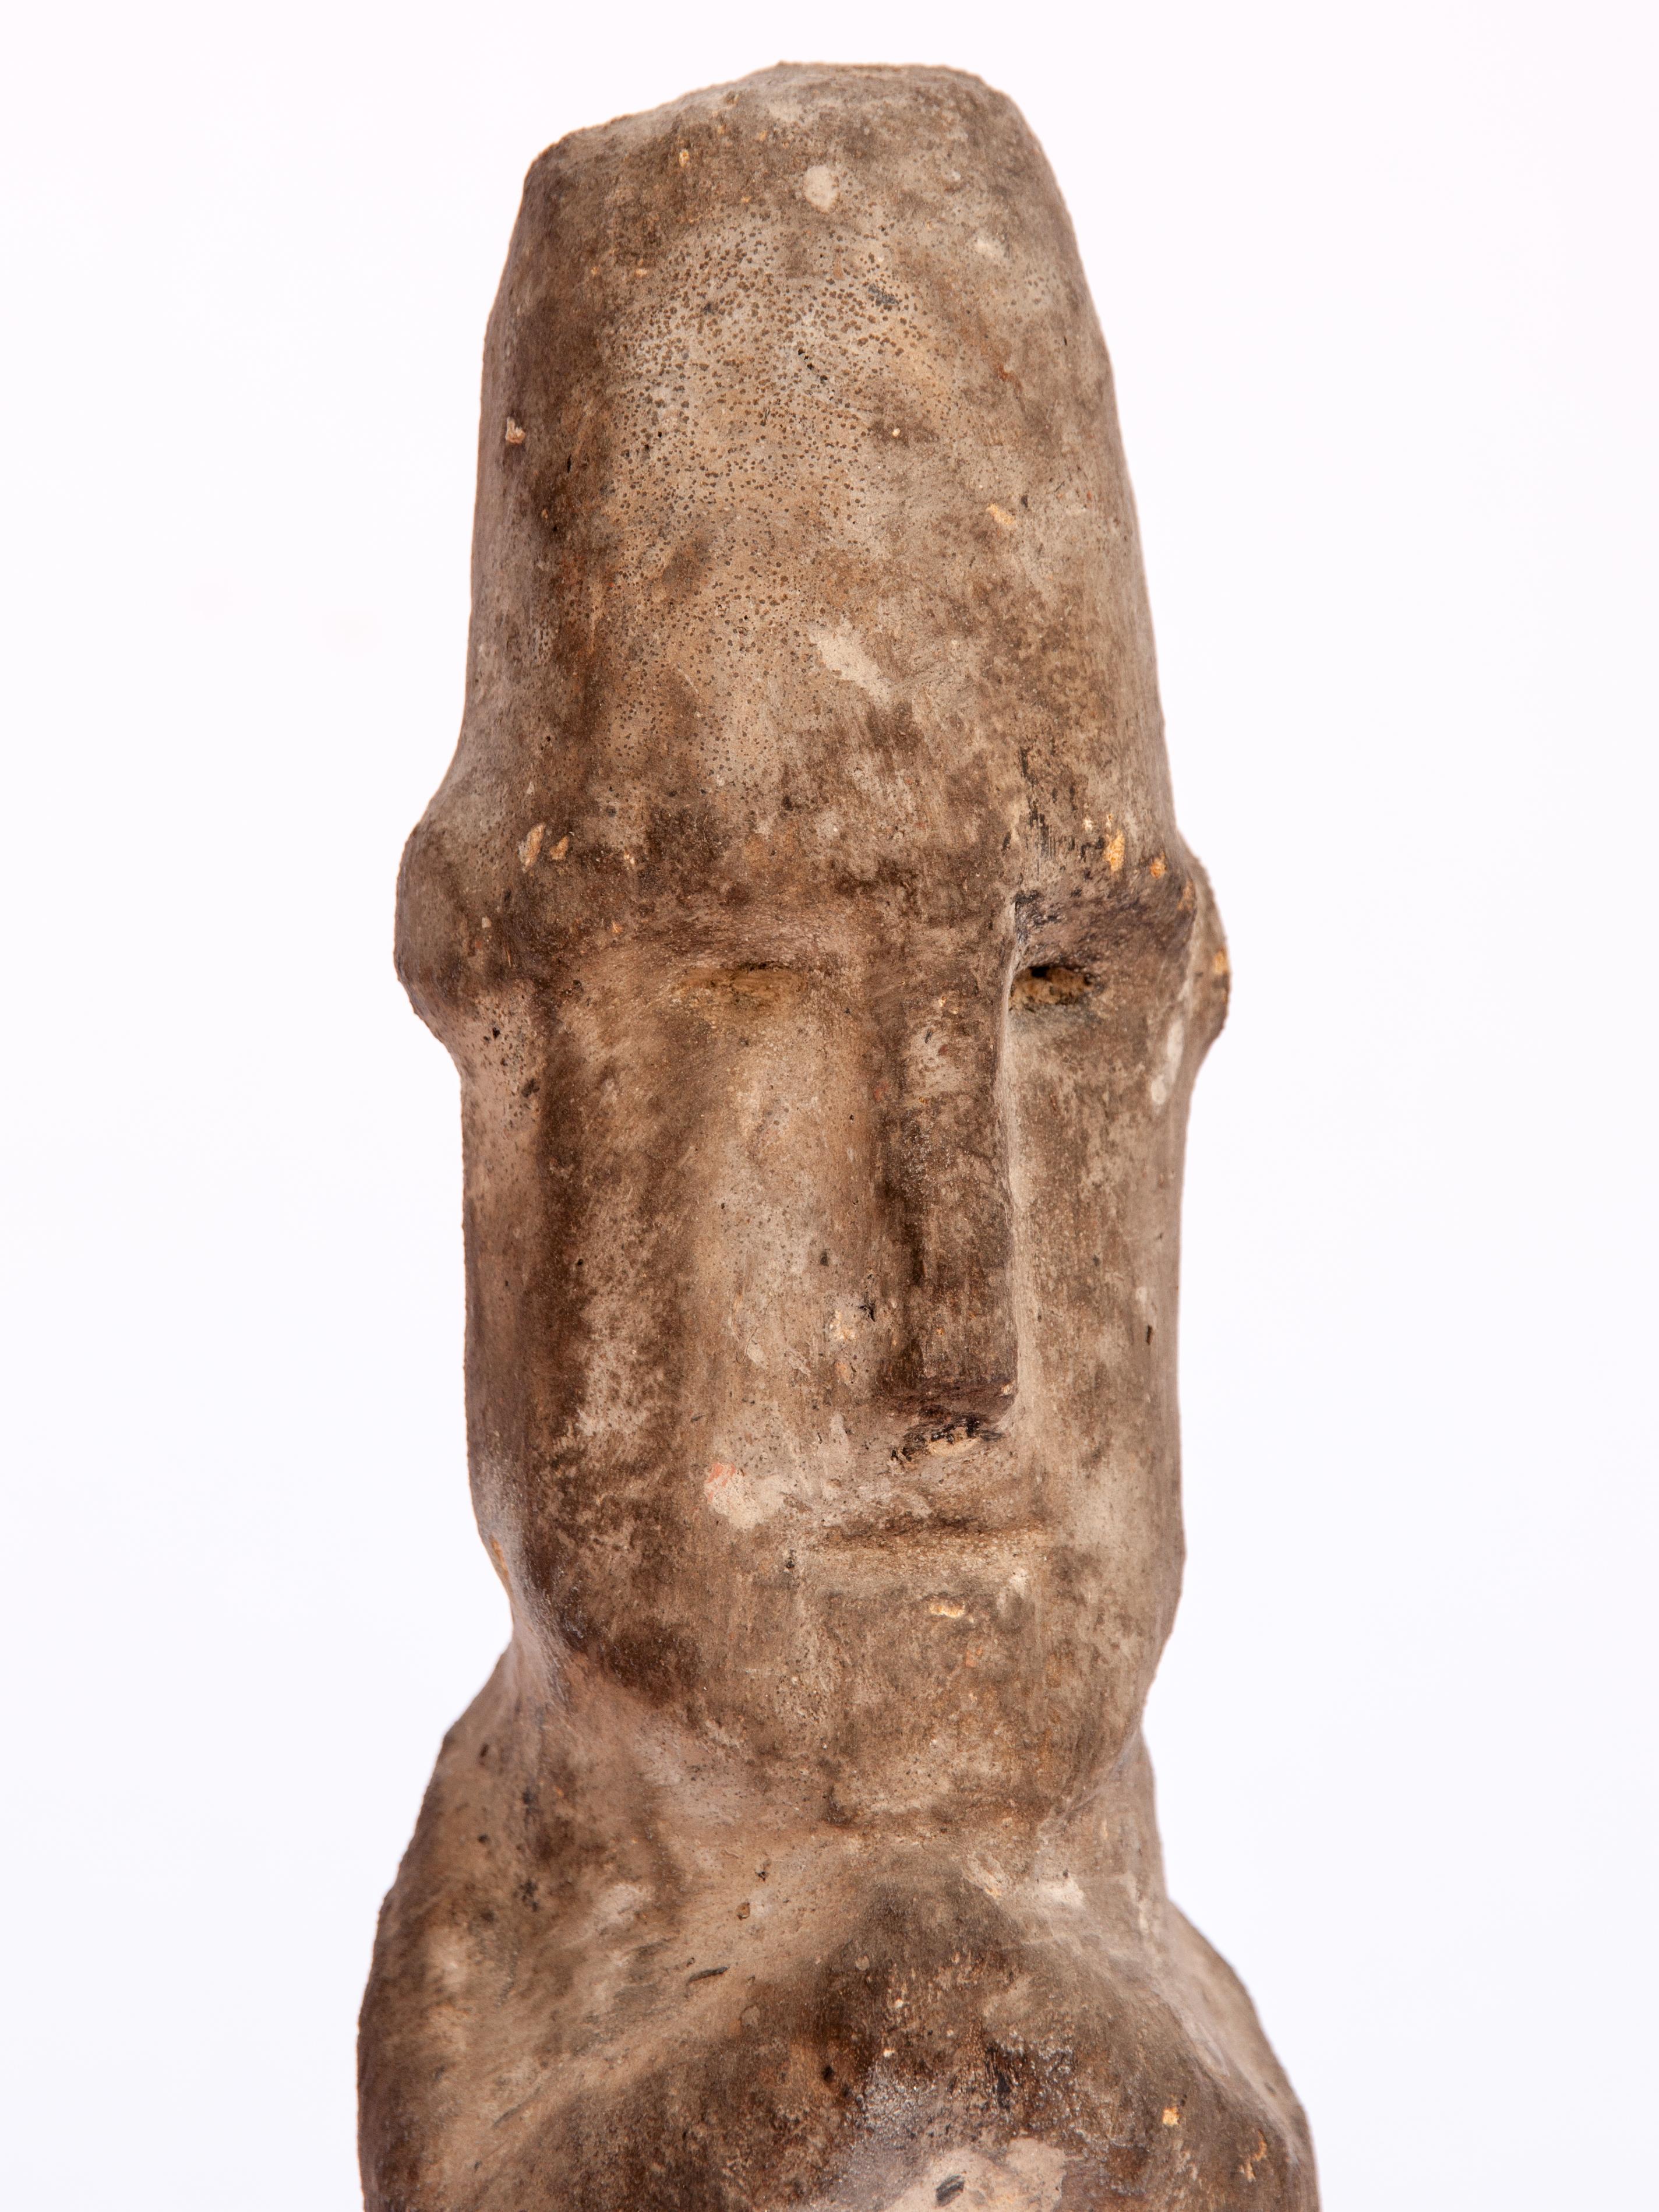 Tribal stone figure from West Nepal, early to mid-20th century. 17.25 inches tall. Mounted on a metal base.
This stone figure comes from West Nepal, most likely from Bajura District, or bordering areas of the Karnali Basin. It is posed sitting with